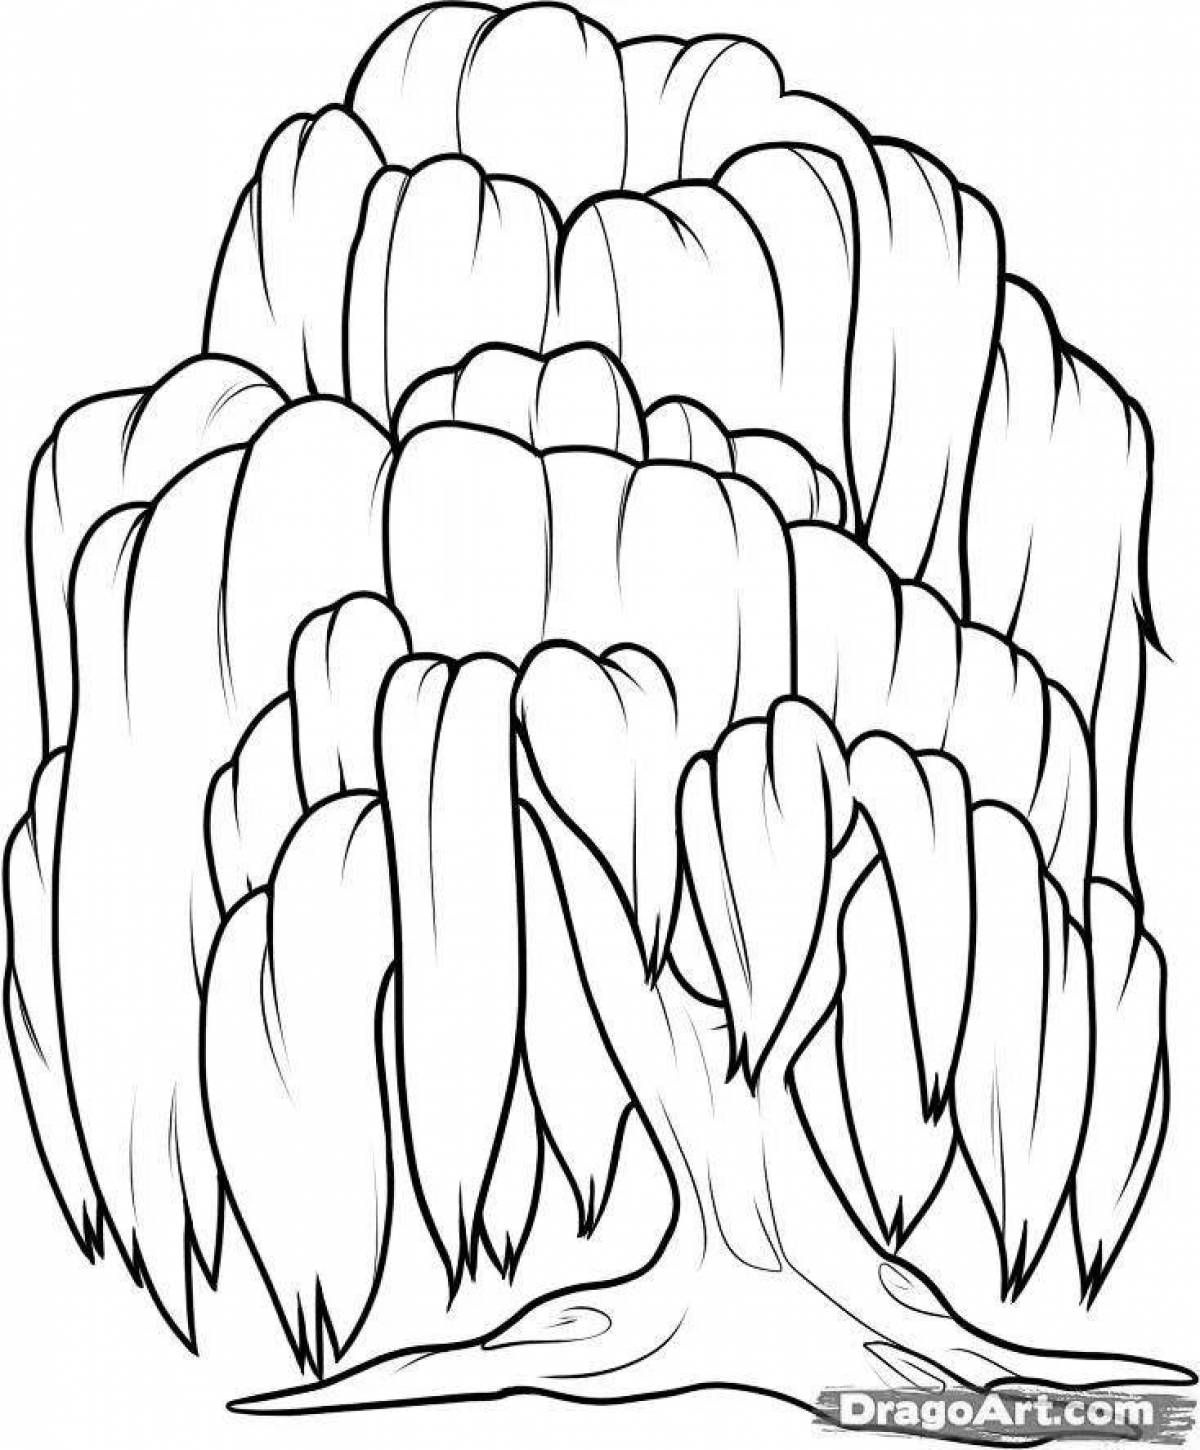 Blooming willow coloring page